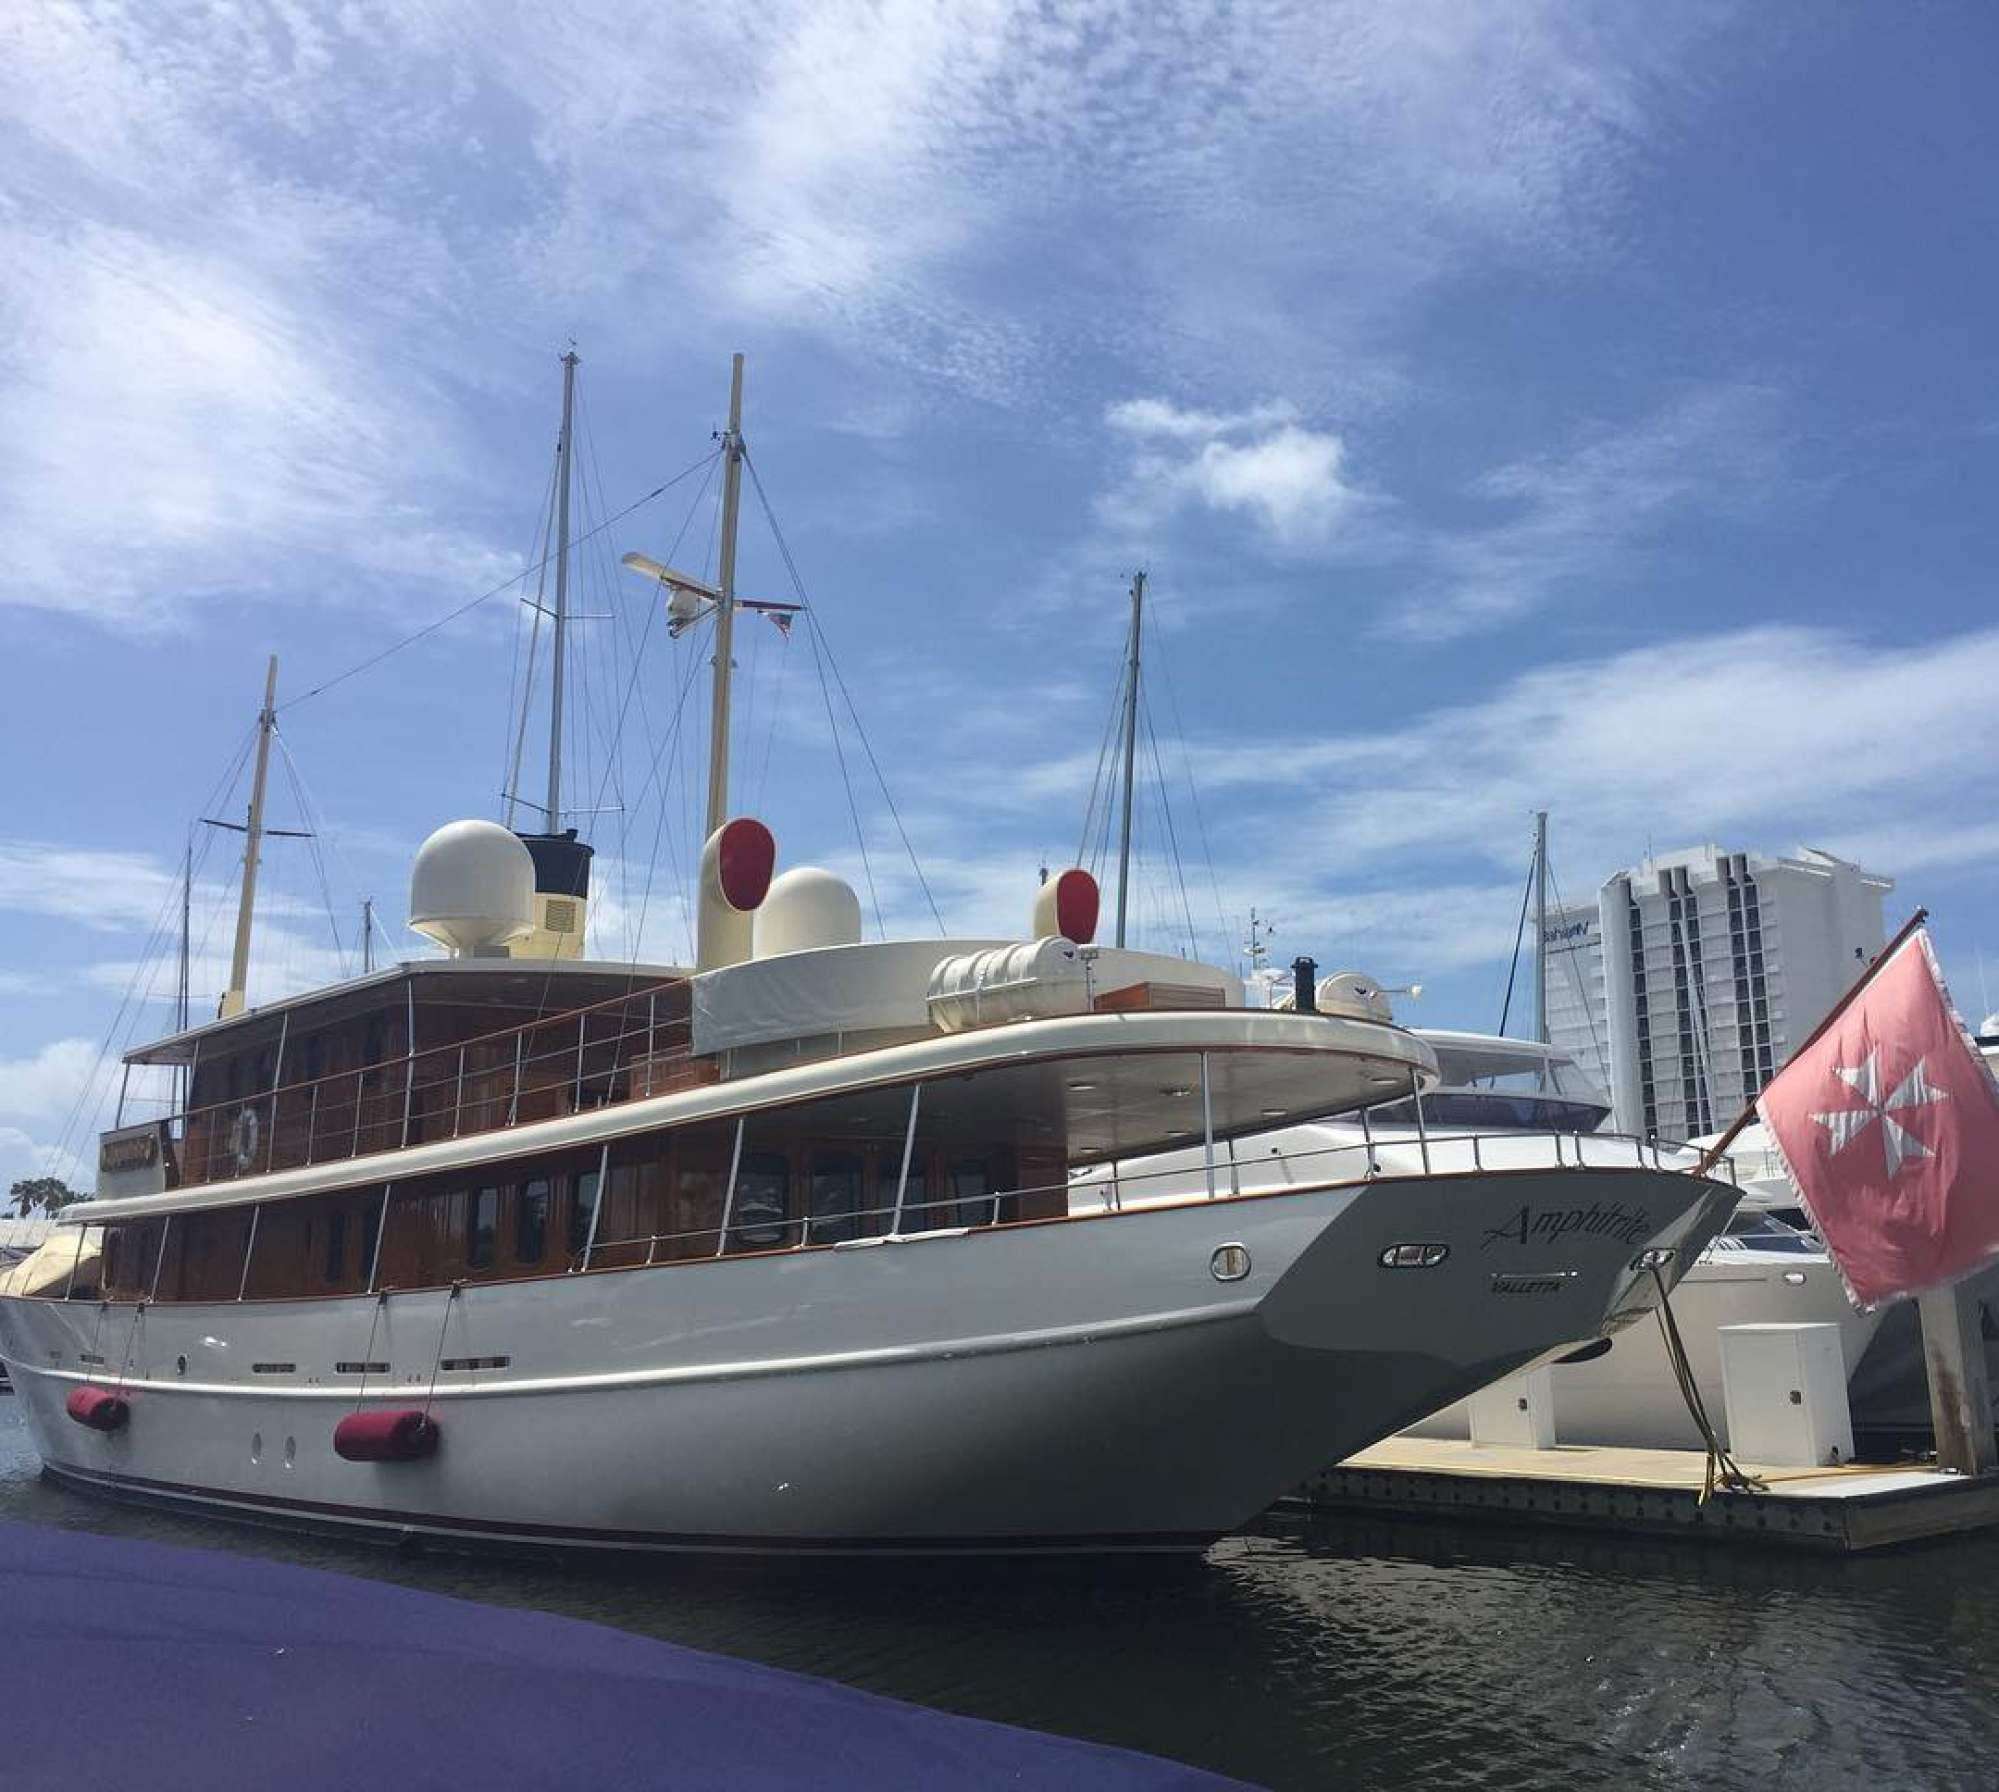 A yacht is just one of Pirates of the Caribbean actor Johnny Depp’s extravagant purchases. Photo: @jwoods1996/Instagram